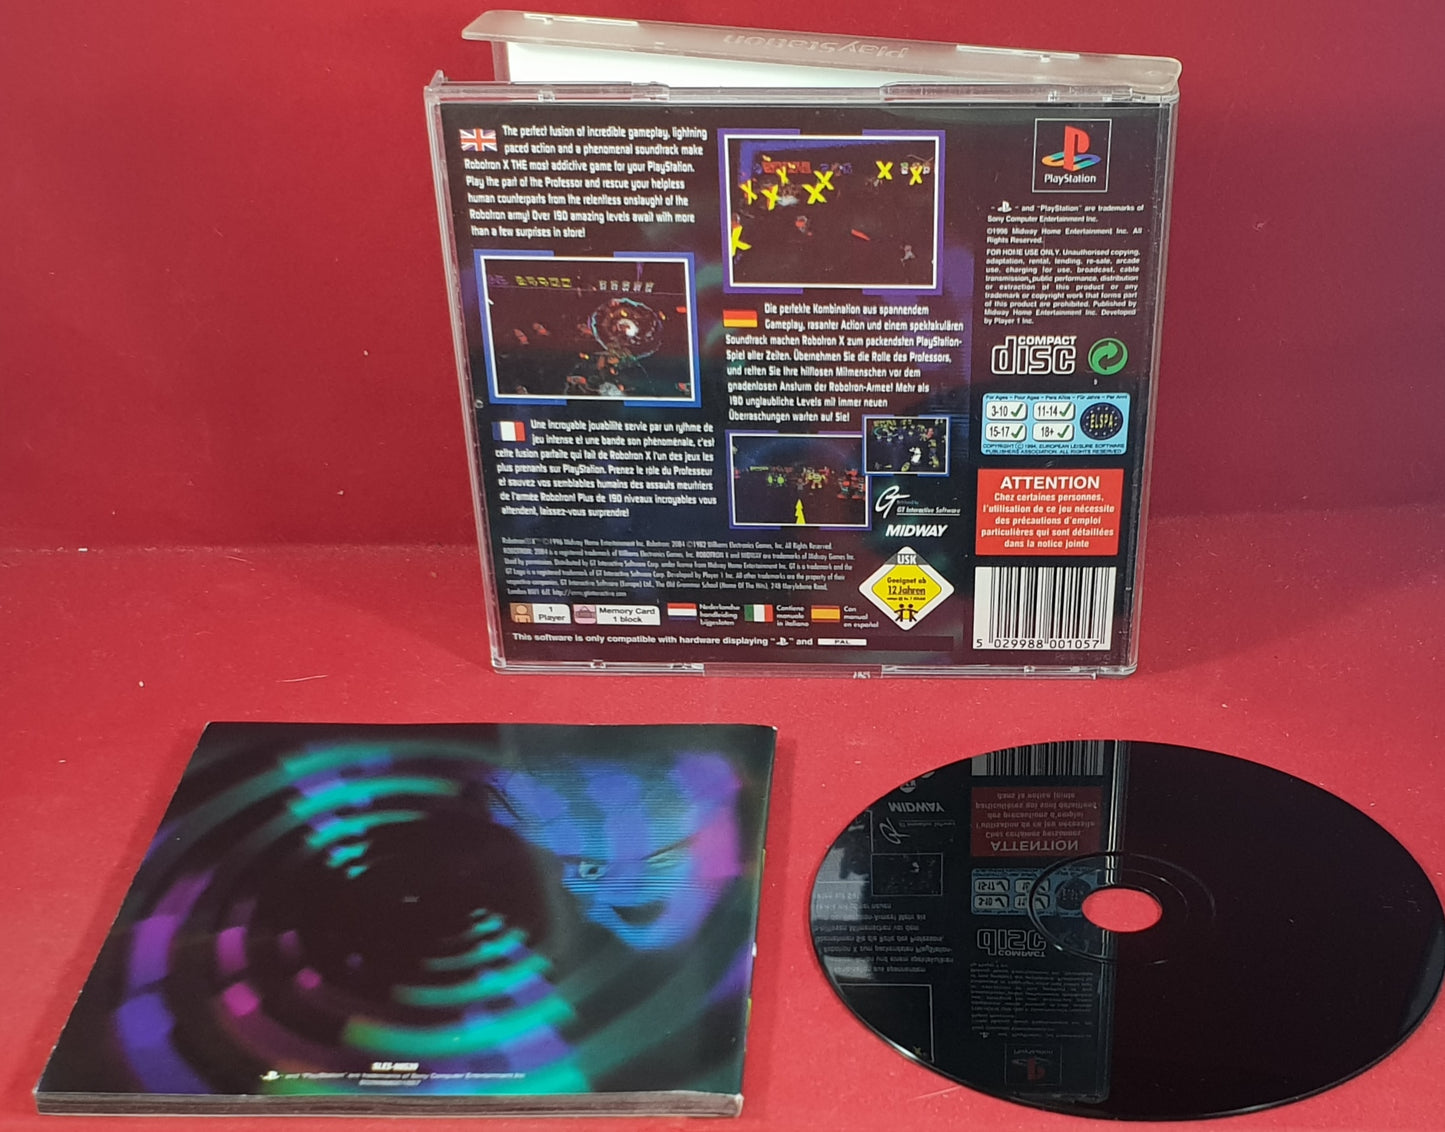 Robotron X PS1 (Sony Playstation 1) Game